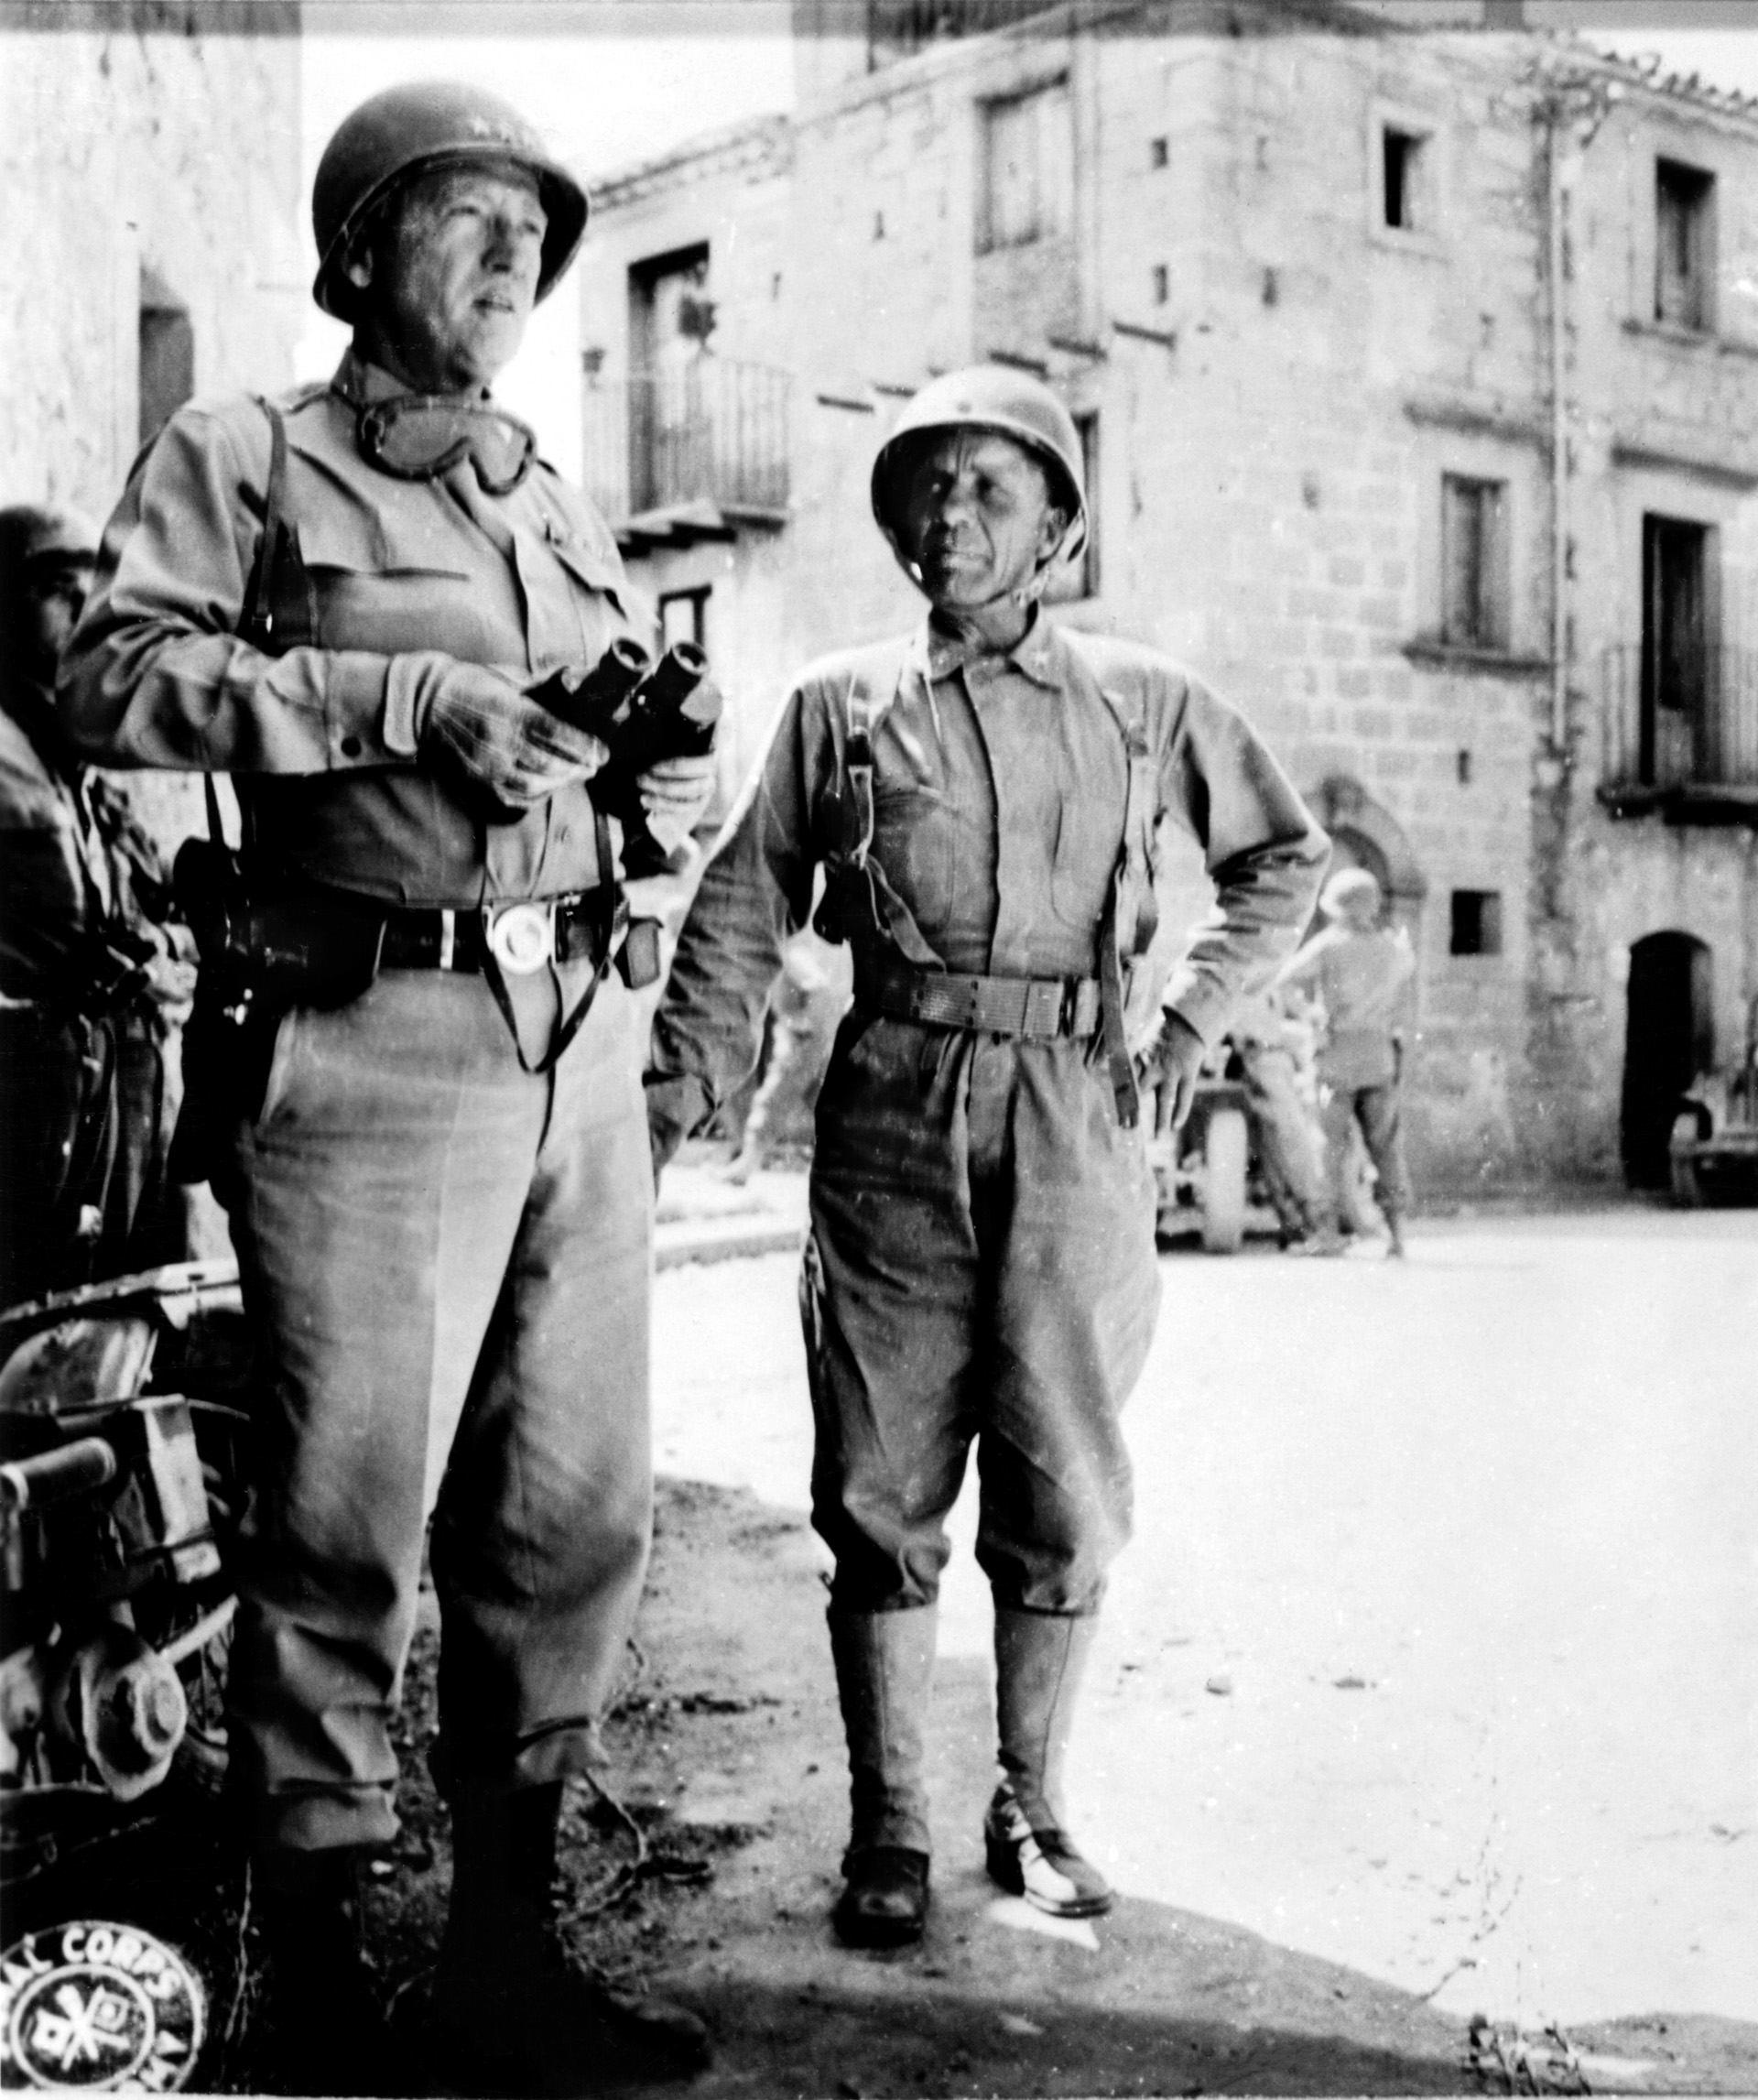 Patton examines the front with Brigadier General Teddy Roosevelt Jr., the assistant commander of the 1st Infantry Division and the son of the twenty-sixth president. With his beachhead secure, Patton could now focus on capturing the rest of Sicily. 